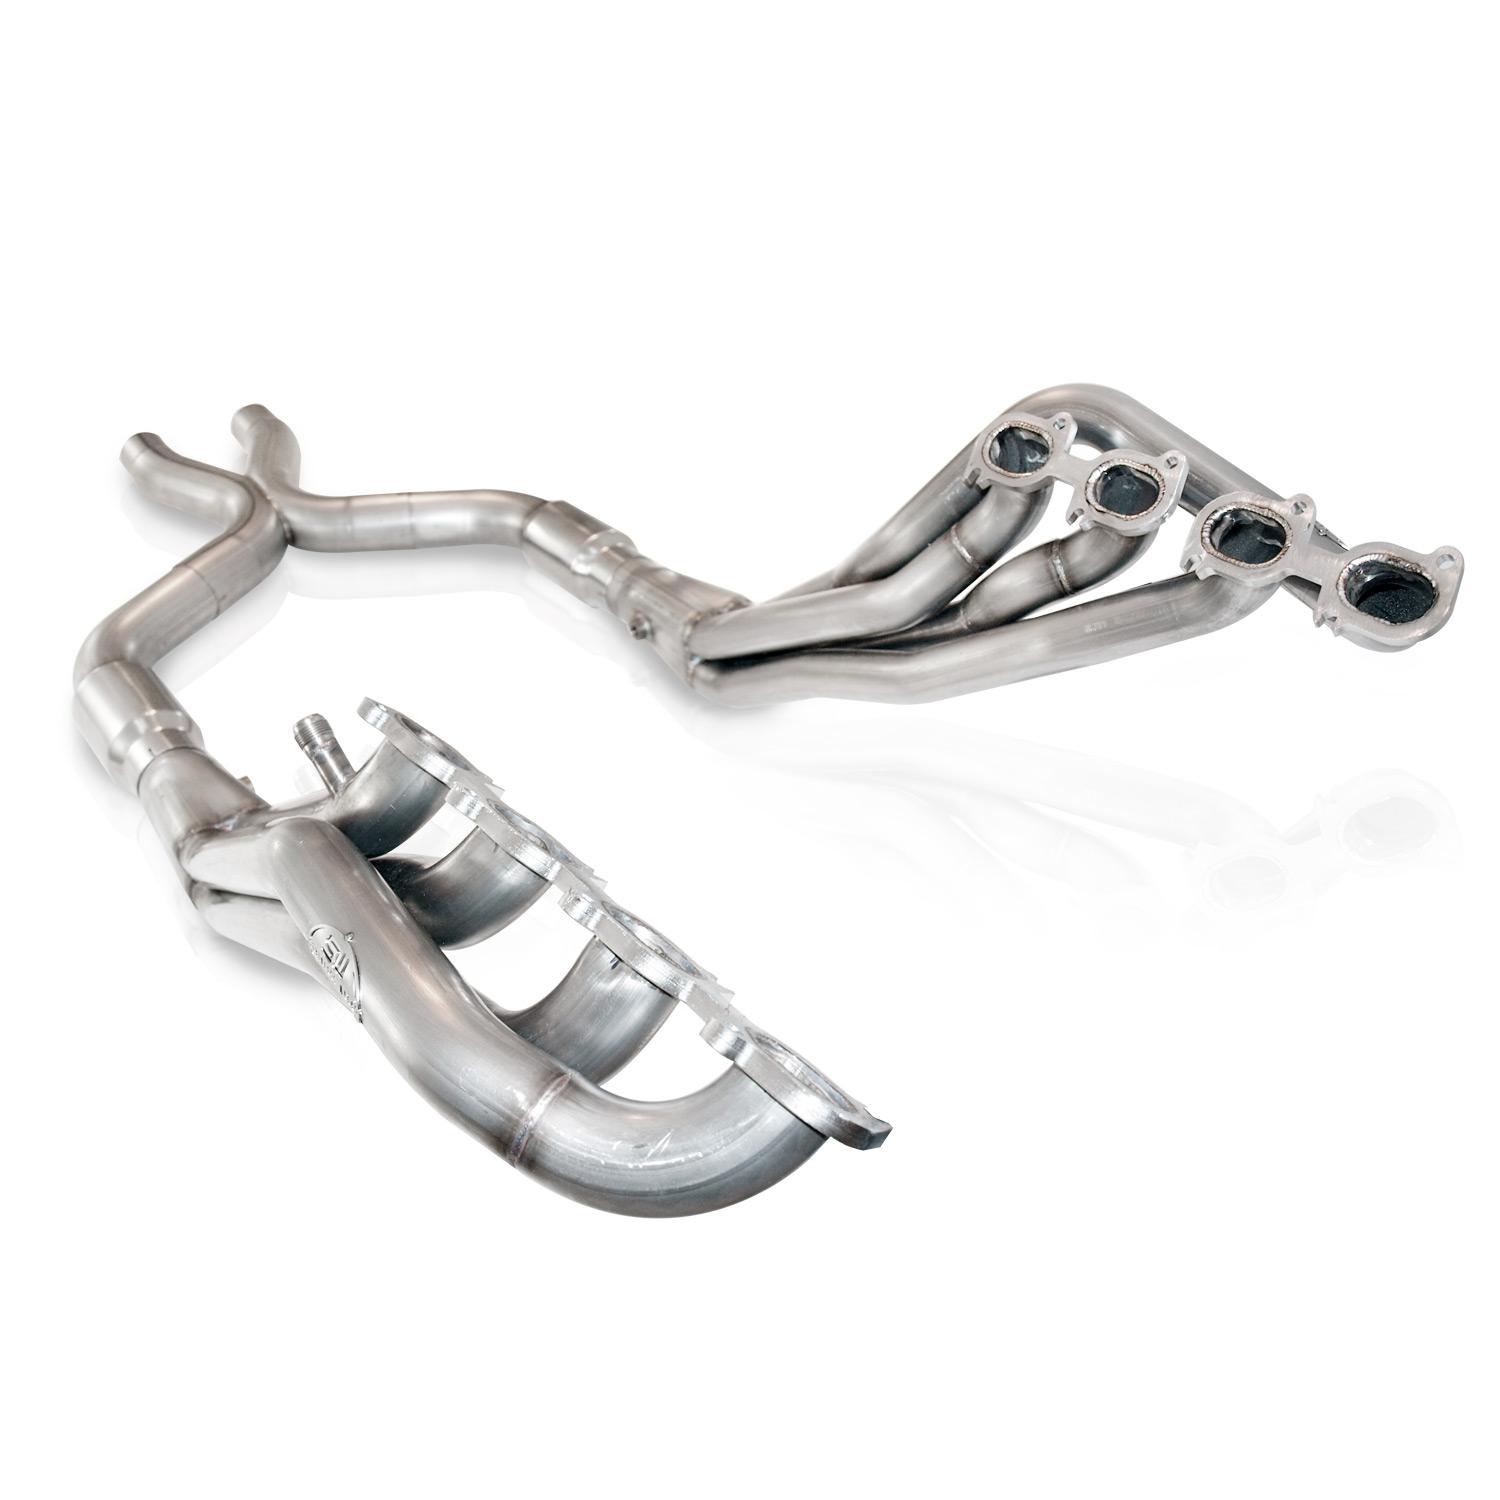 2007-2014 Ford Mustang GT500 Stainless Works 1 7/8" Long Tube Headers w/3" Collectors & 3" Catted Xpipe